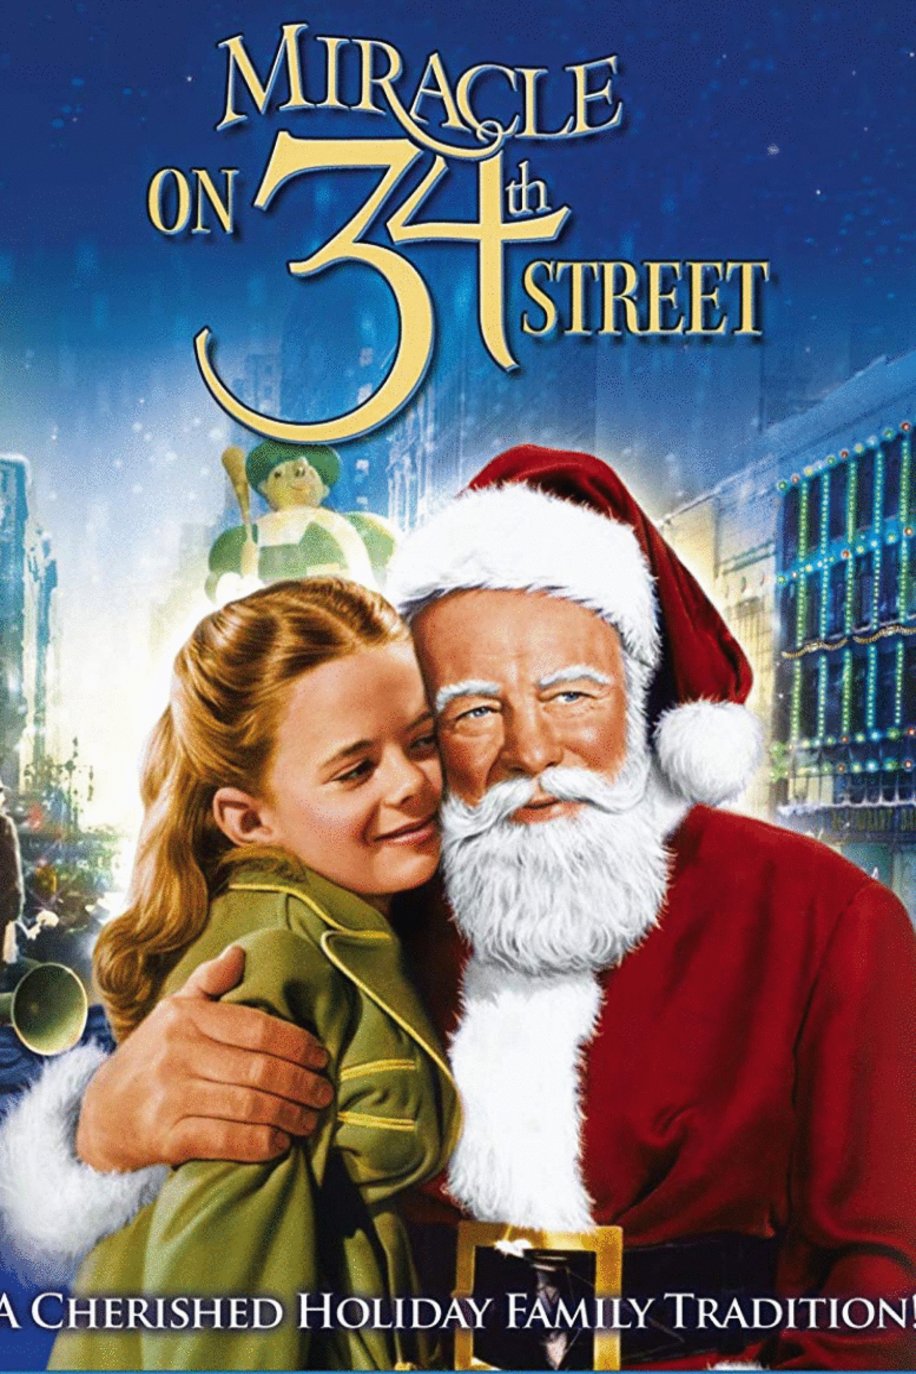 Poster of the movie Miracle on 34th Street